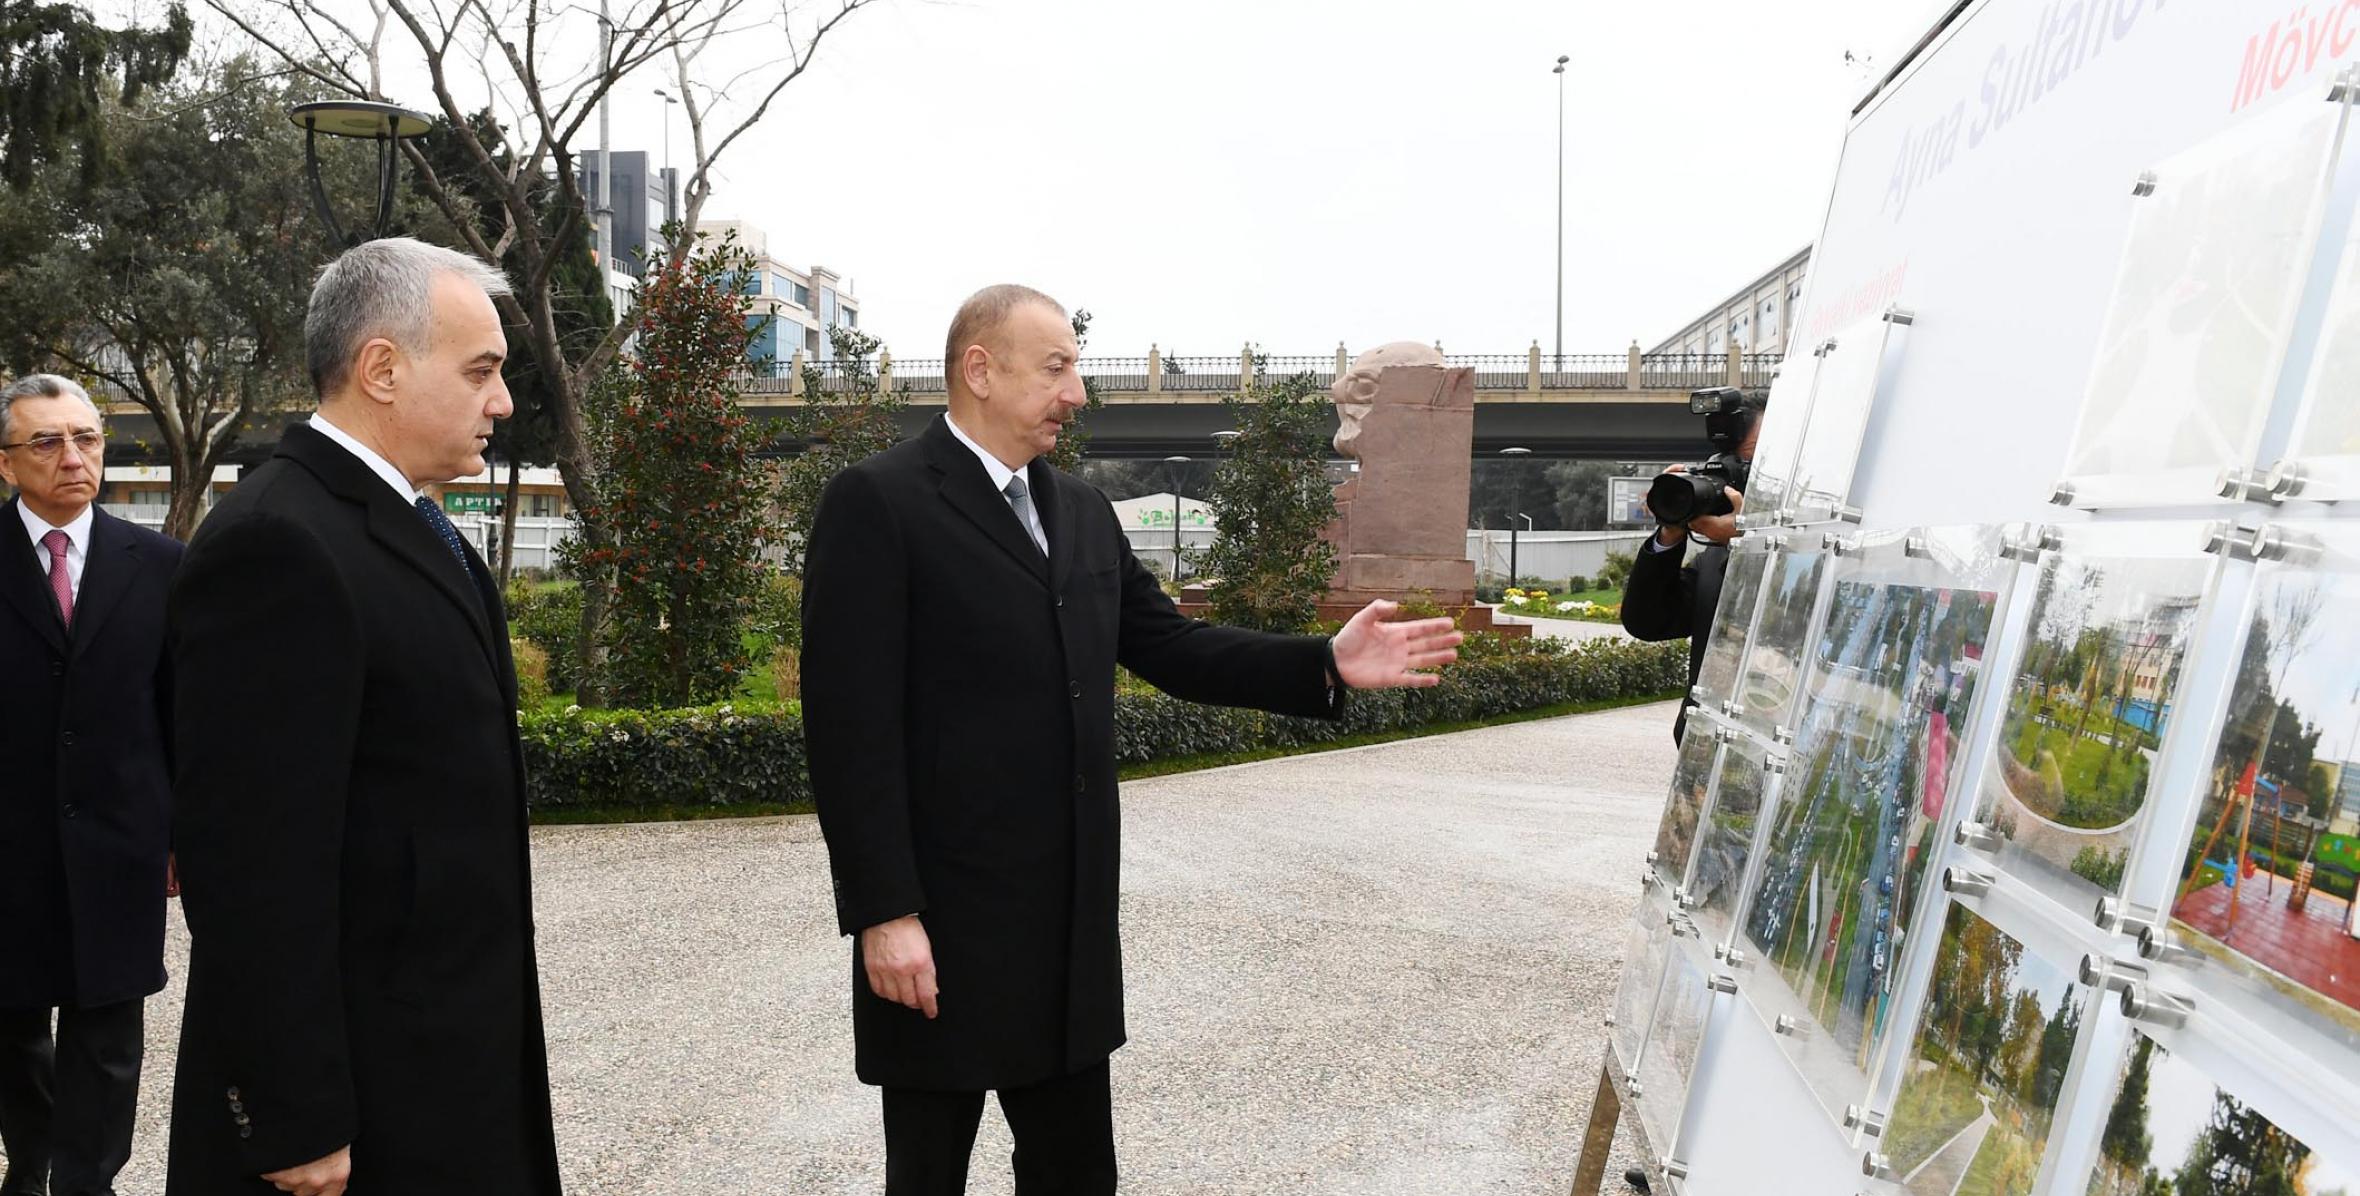 Ilham Aliyev viewed ongoing renovation works in another park in Baku